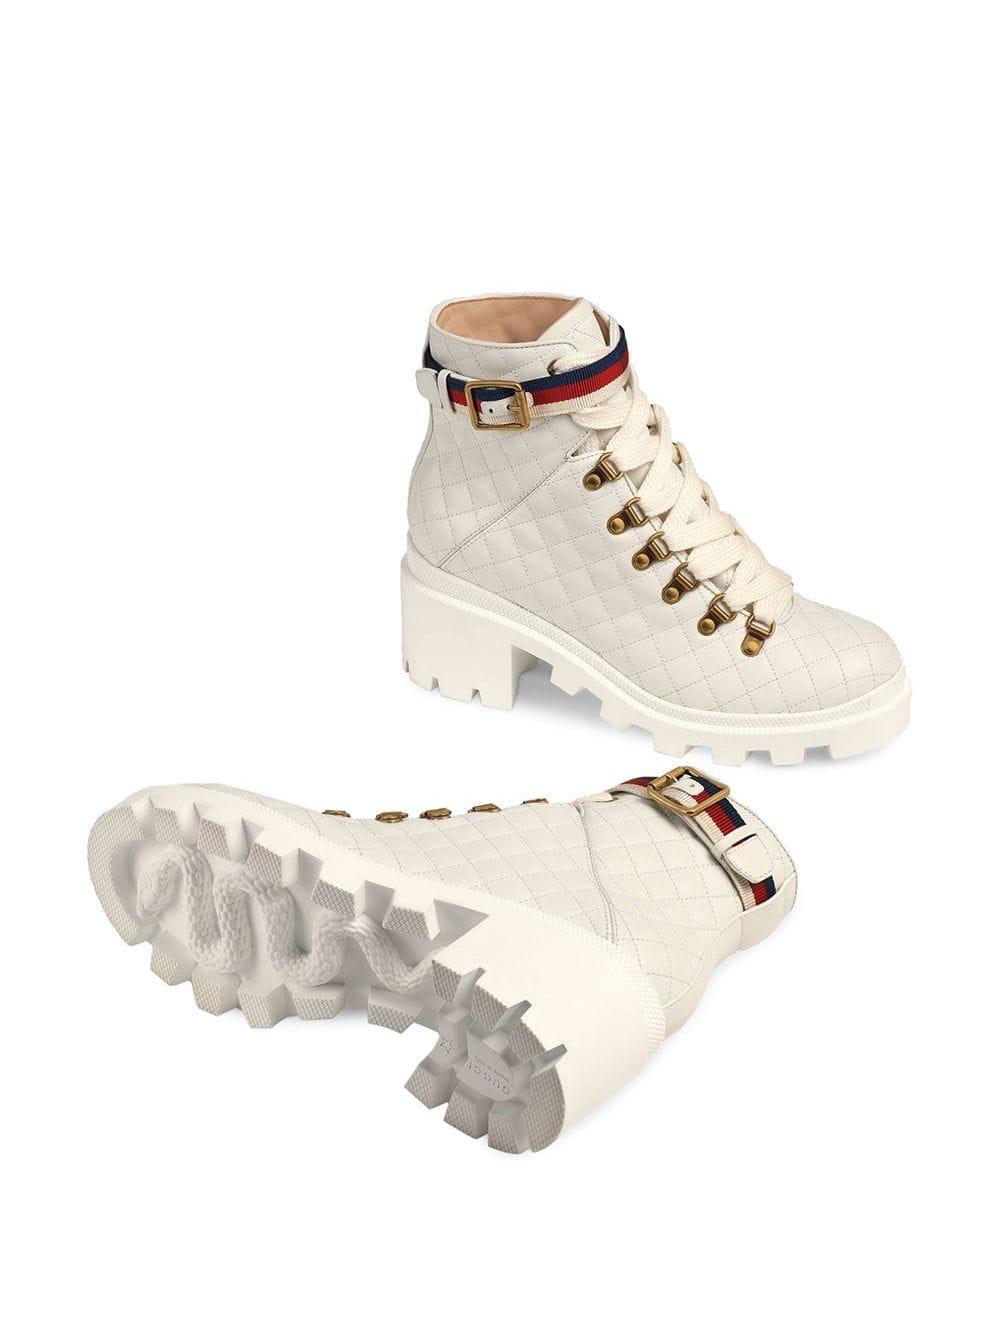 Gucci Quilted Leather Ankle Boot With Belt in White | Lyst